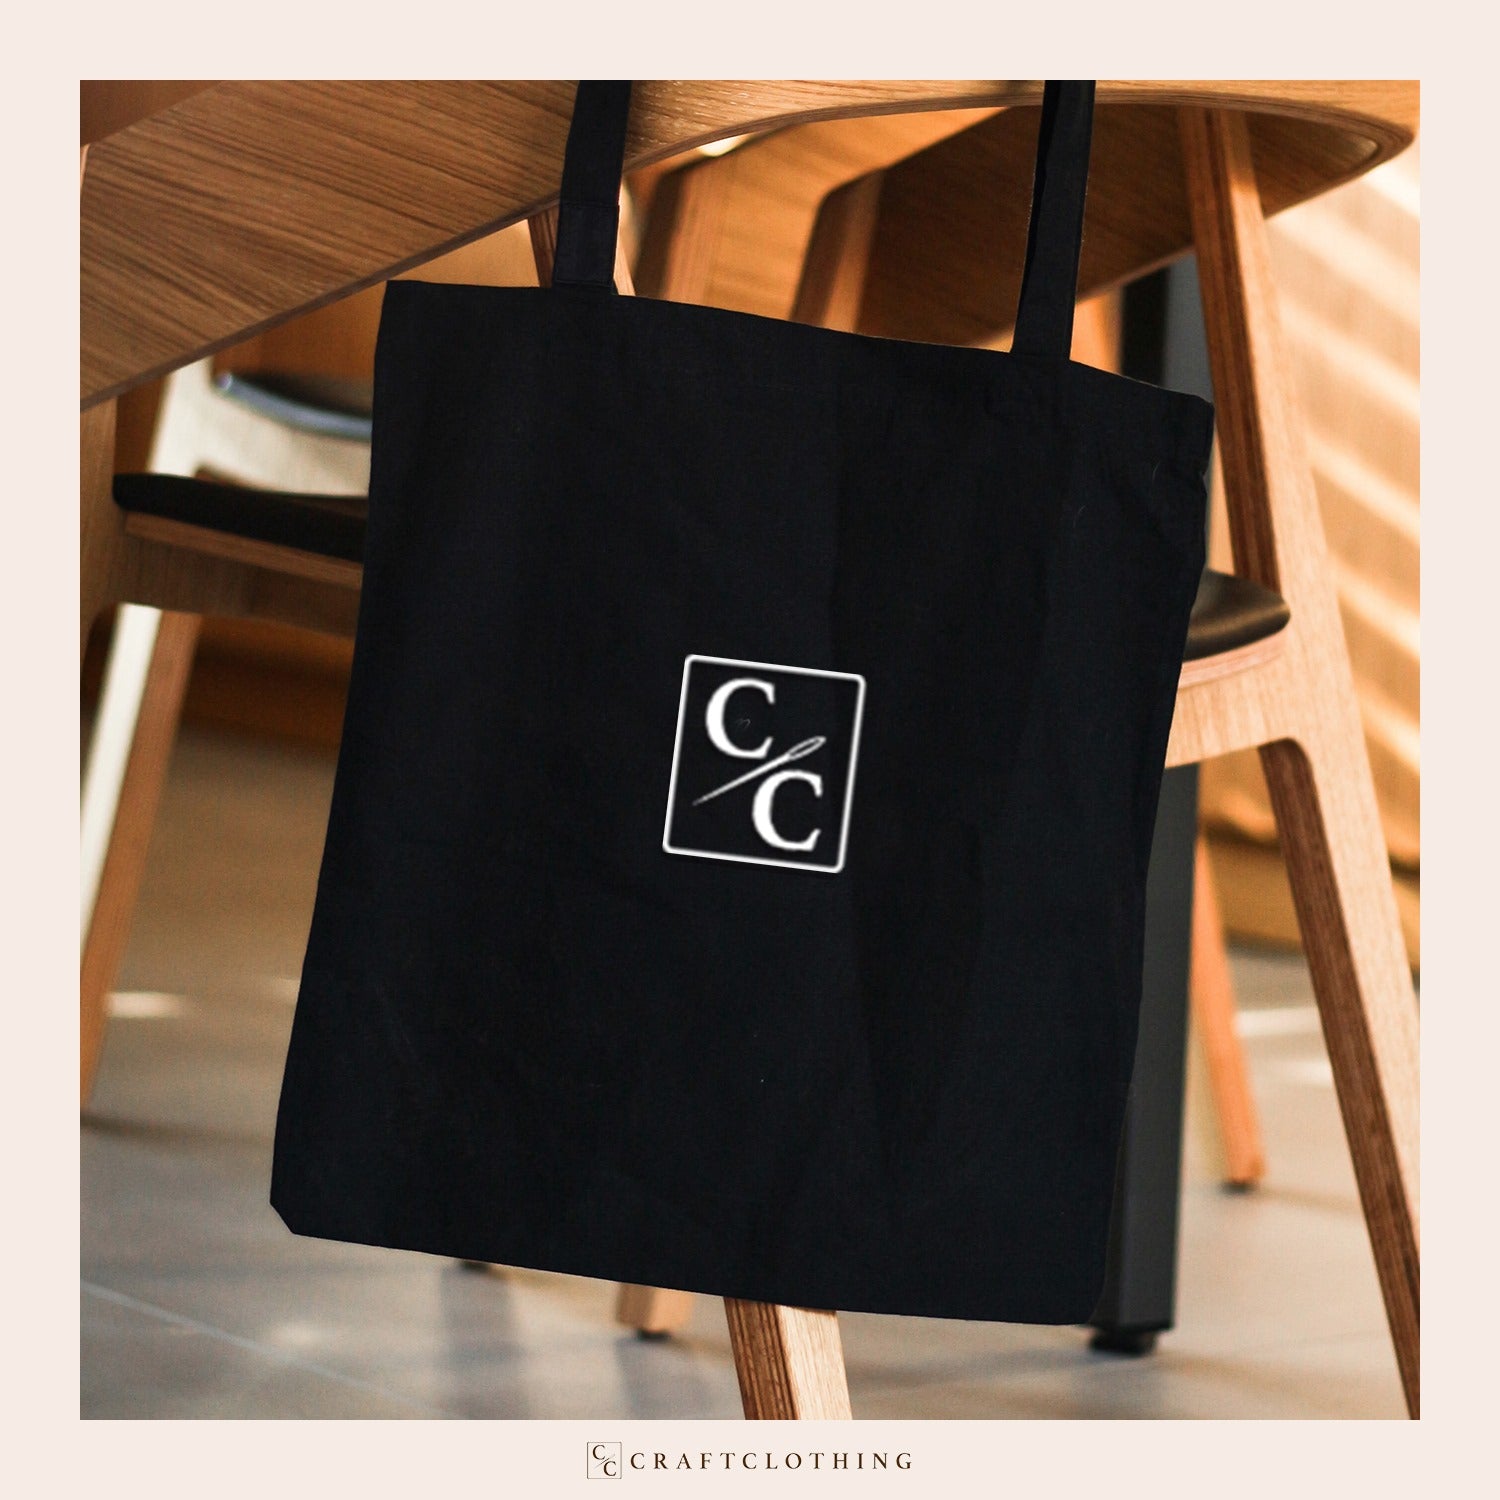 Let’s take your tote bag dreams to reality.